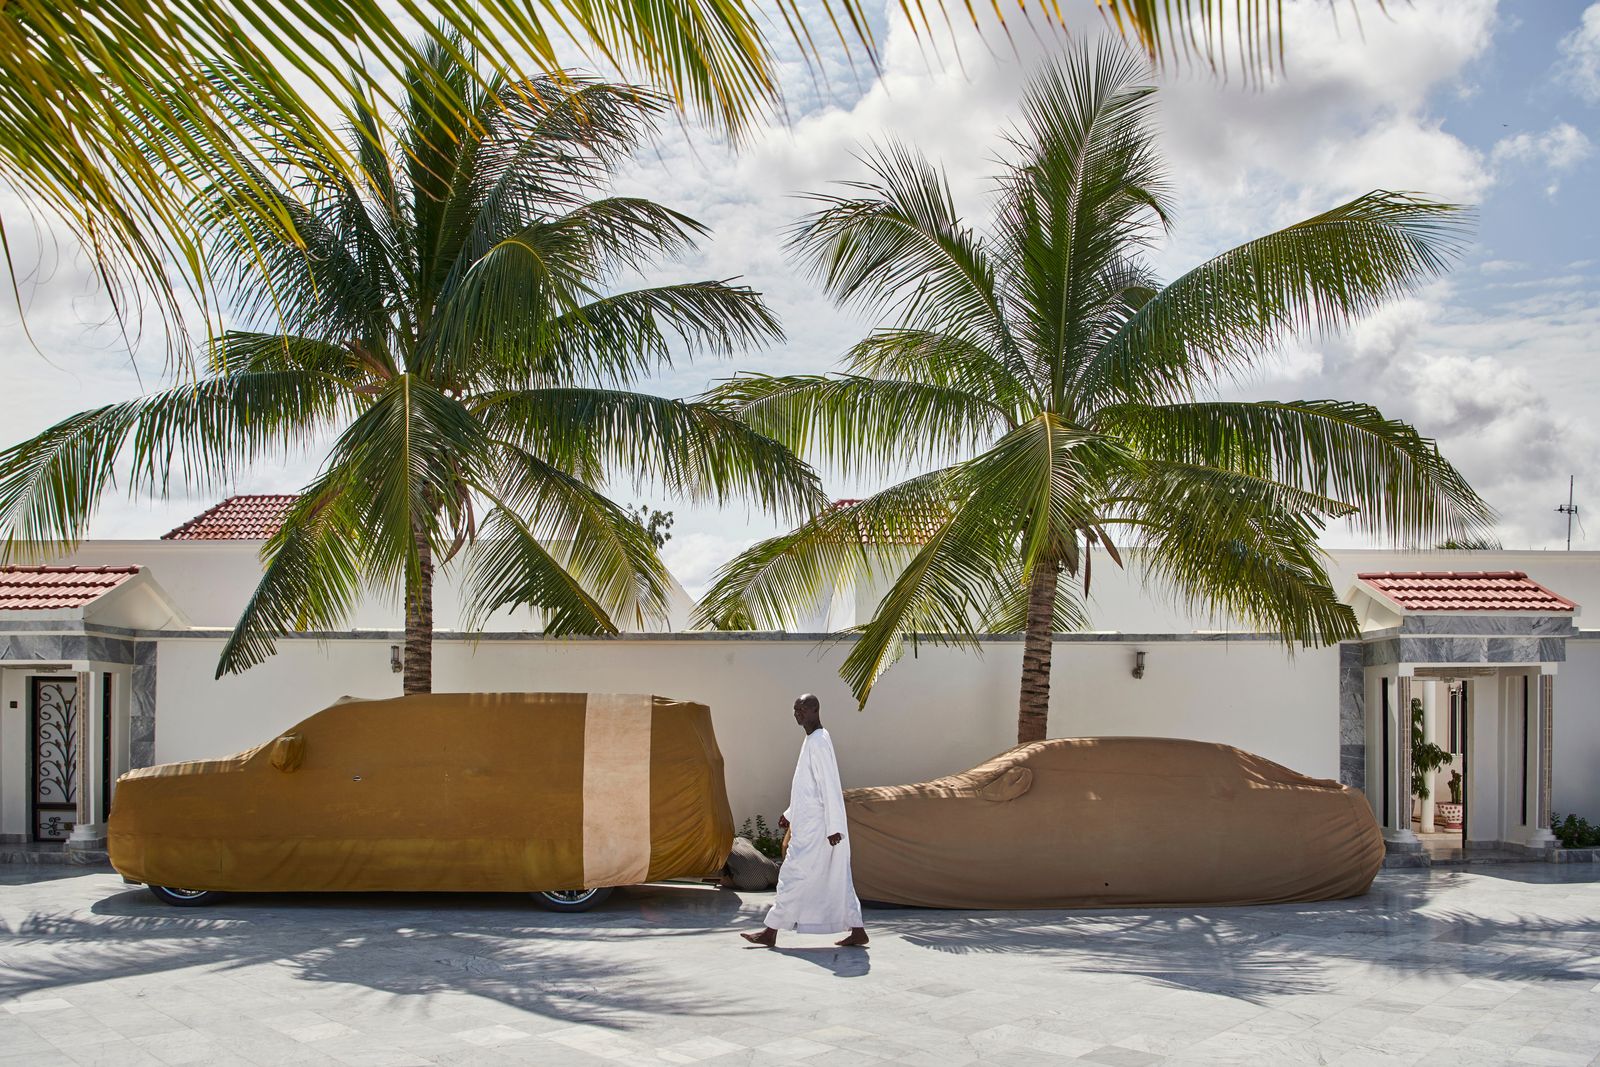 © Christian Bobst - Image from the The Sufi Brotherhoods of Senegal photography project